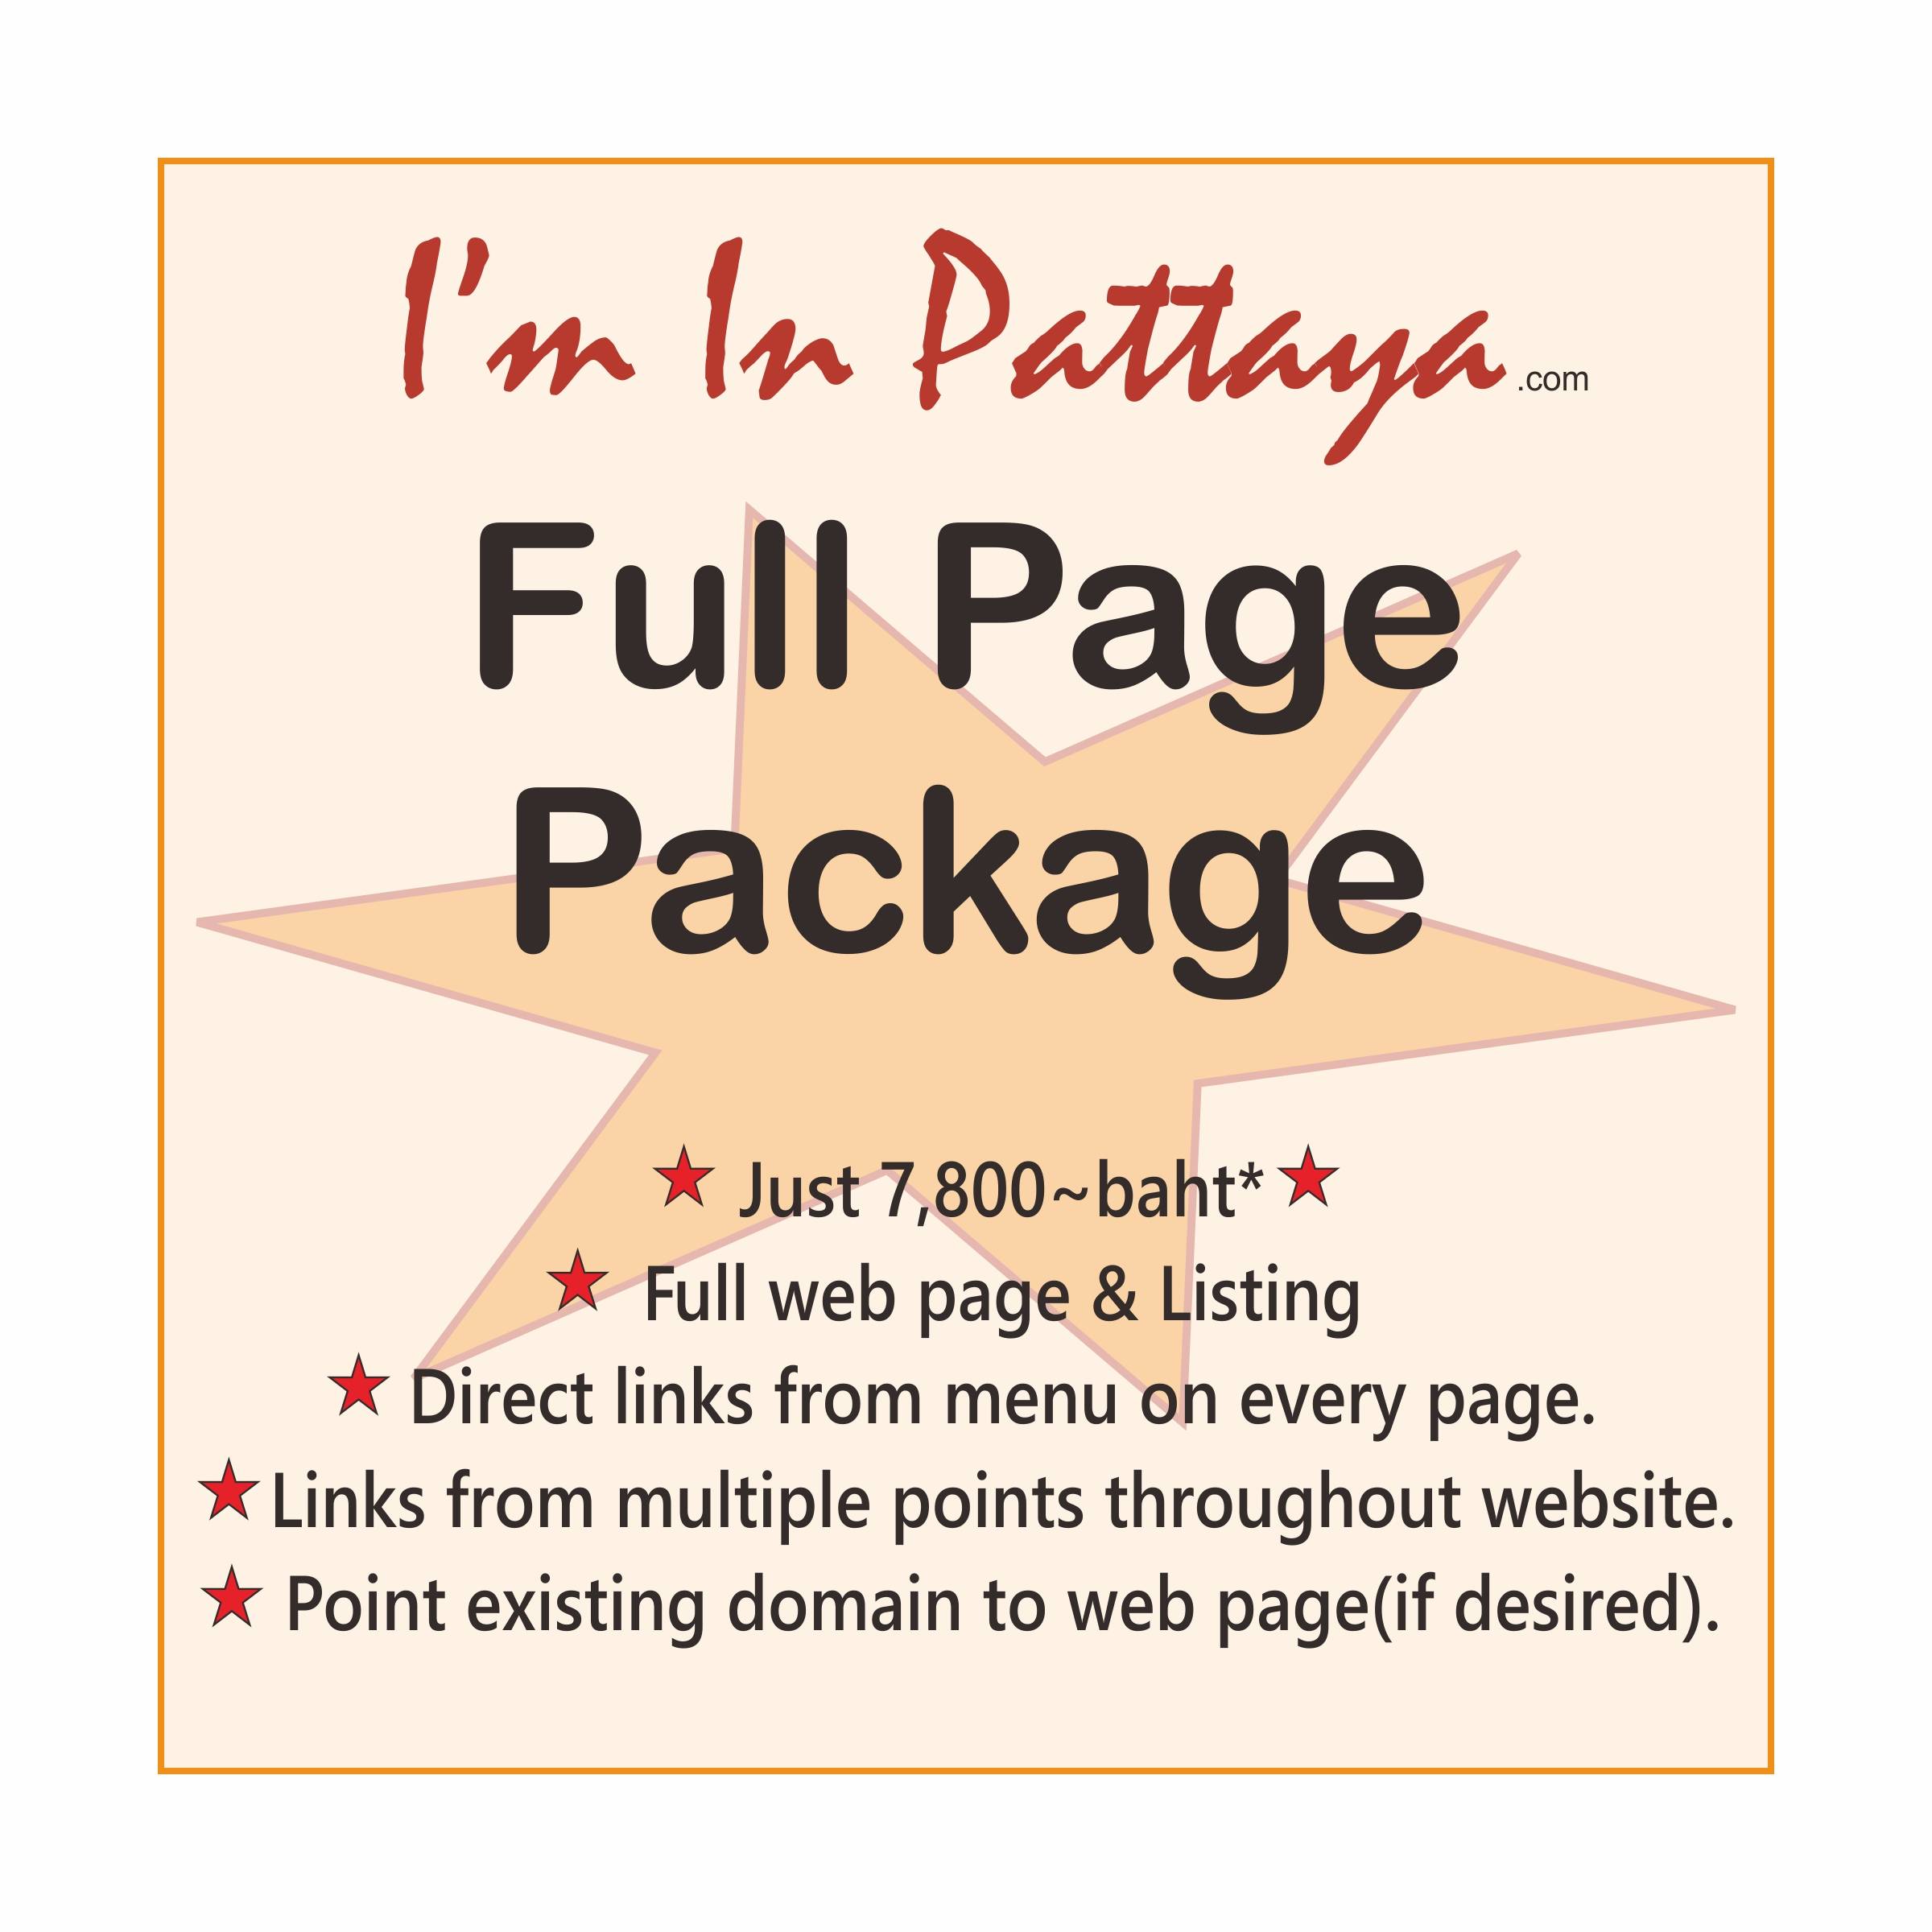 Full page Package